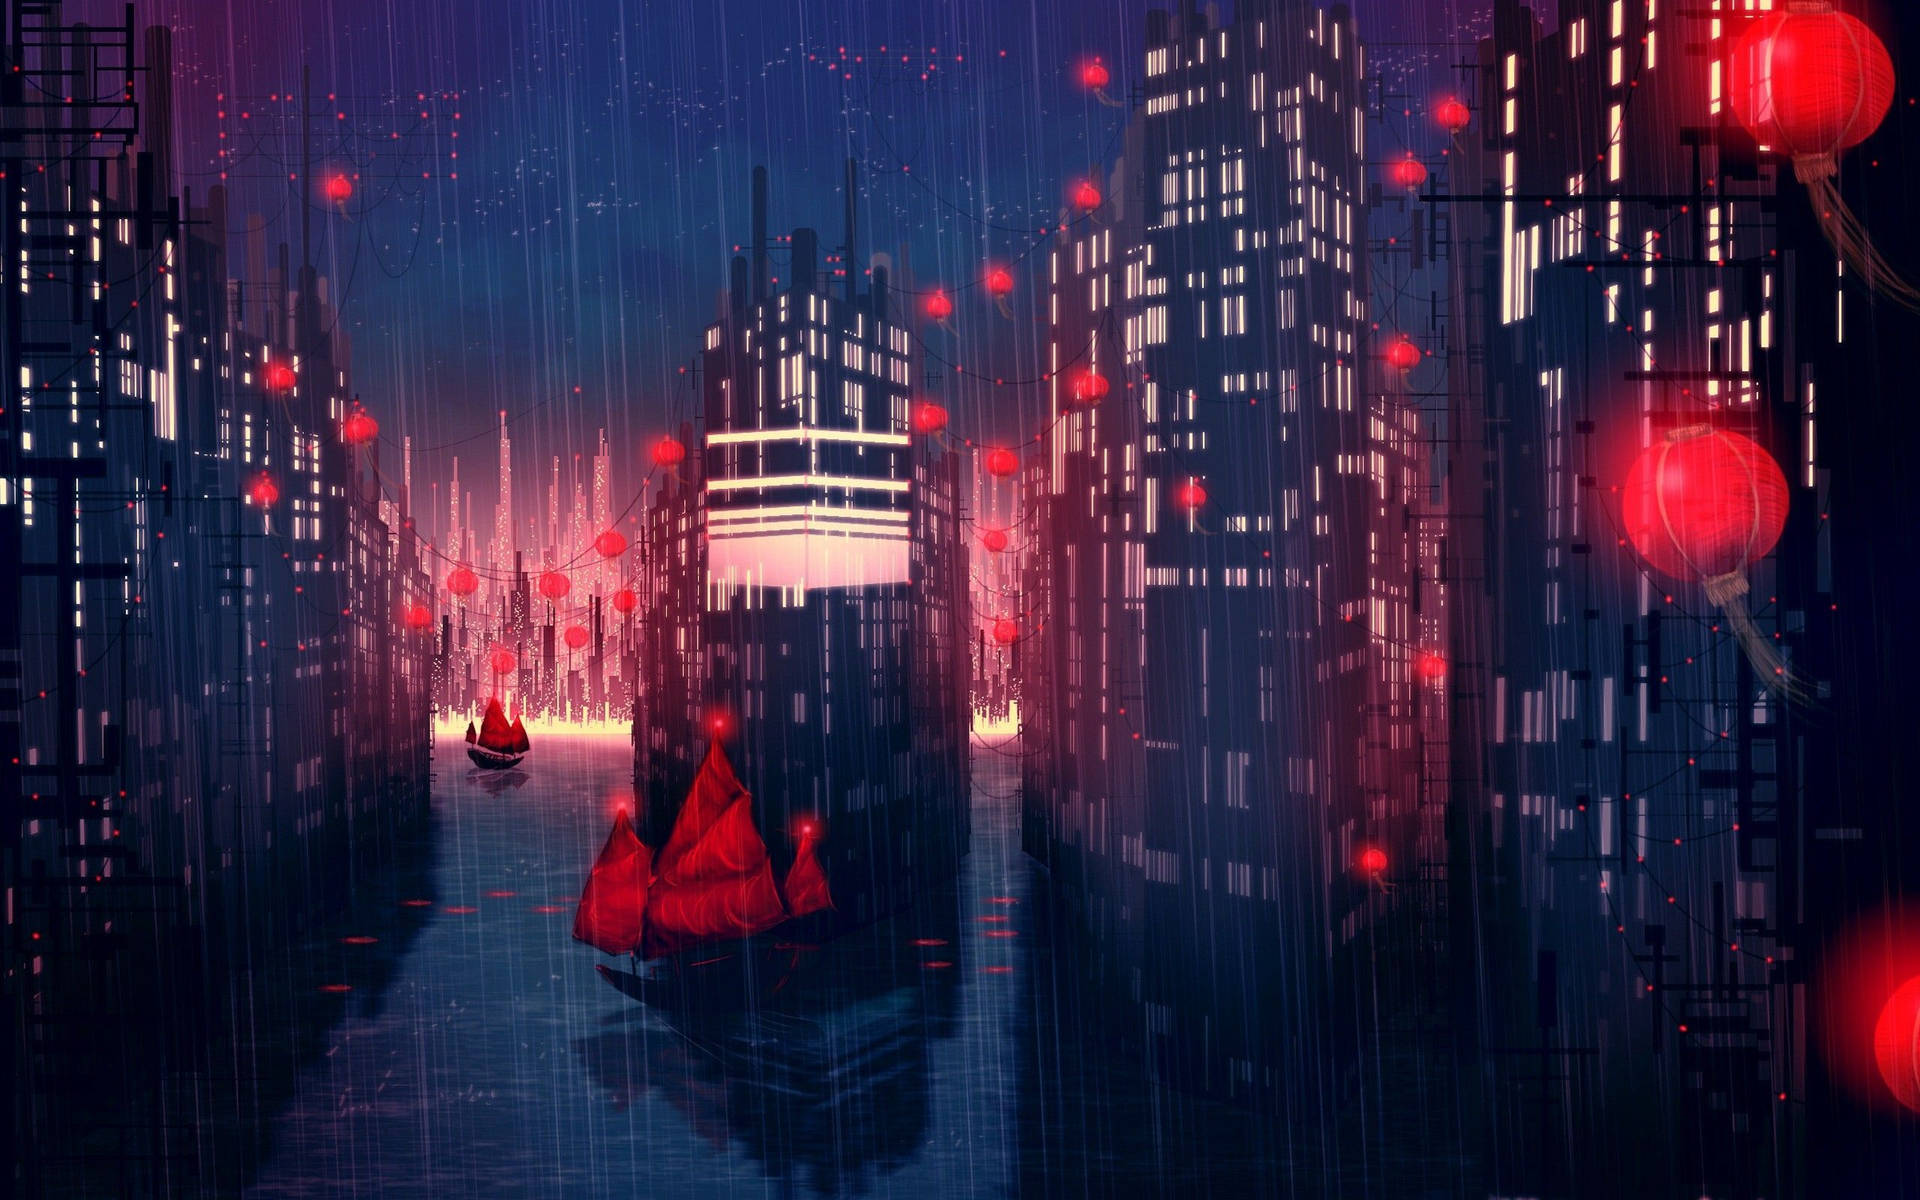 Red Lanterns All Over Anime Night City Wallpaper